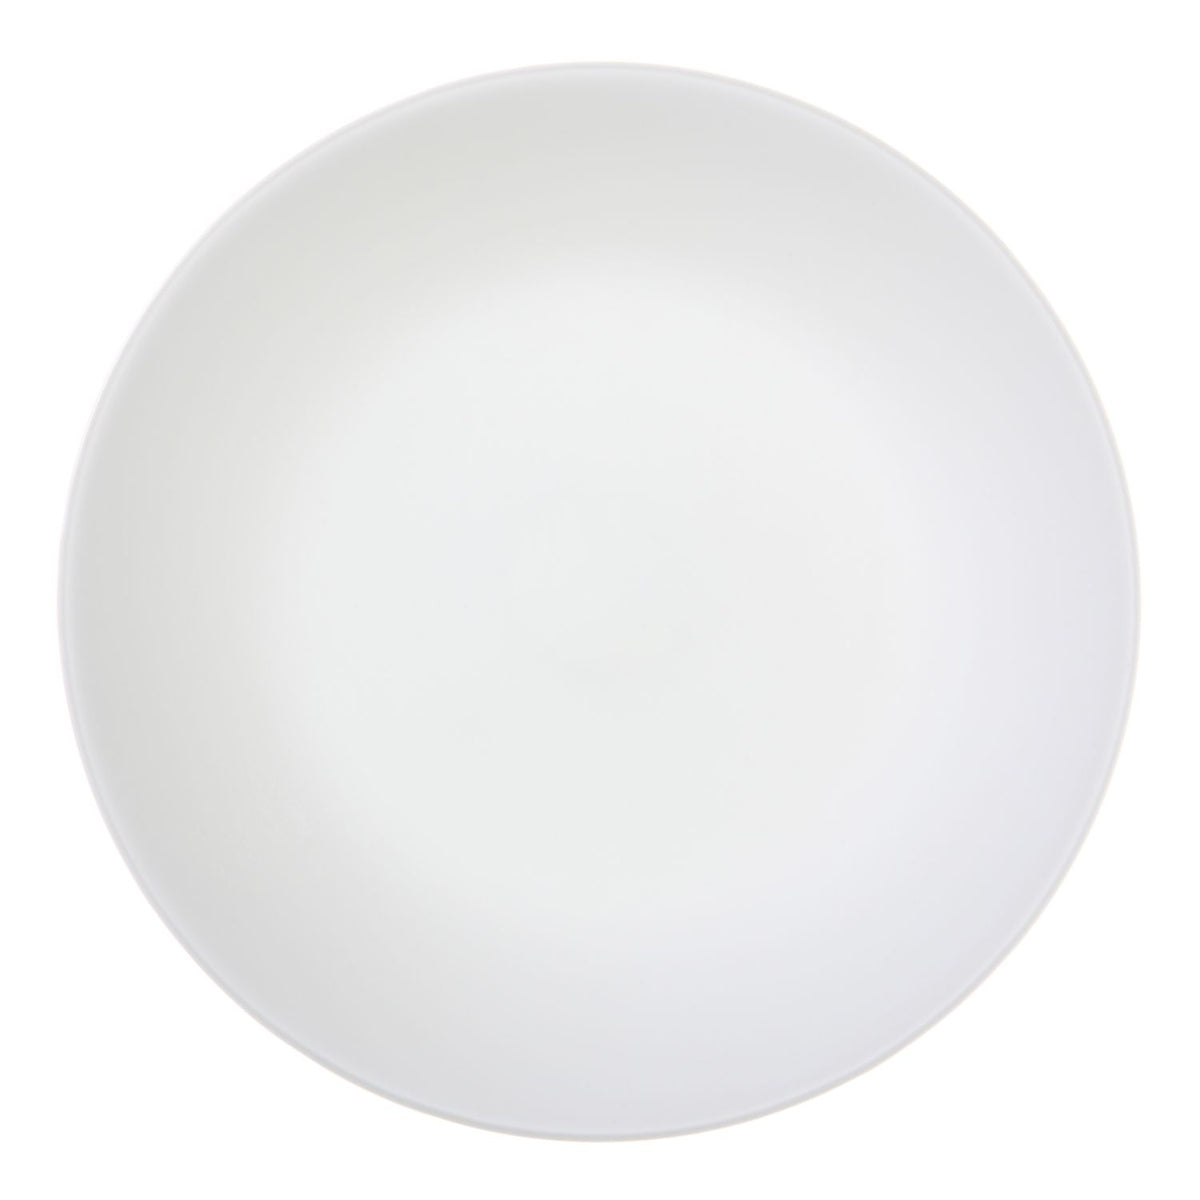 buy tabletop plates at cheap rate in bulk. wholesale & retail kitchen goods & essentials store.